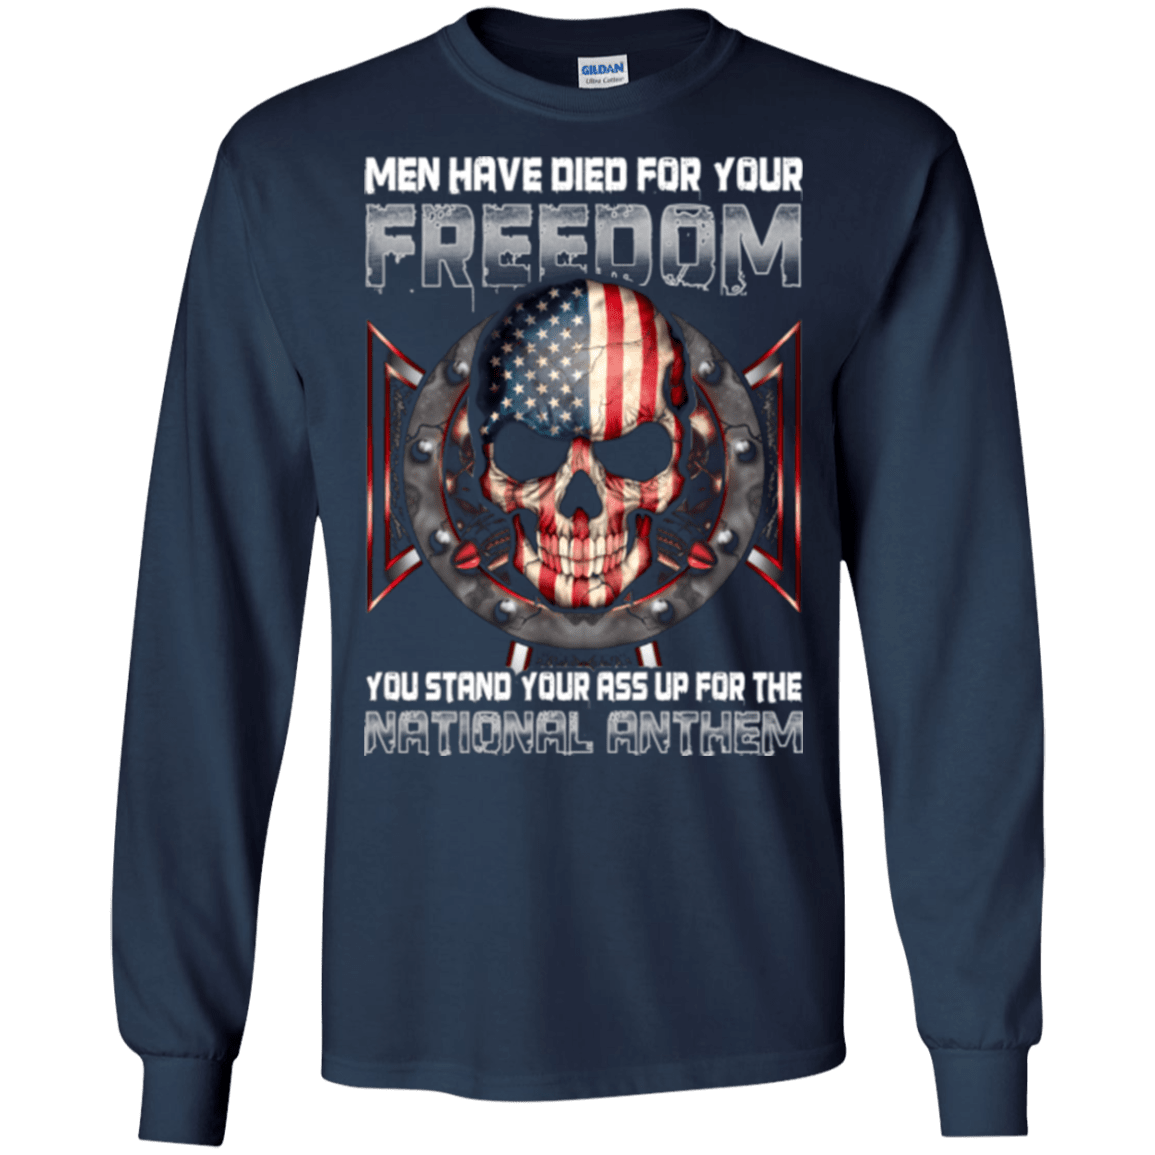 Military T-Shirt "MEN HAVE DIED FOR YOUR FREEDOM STAND UP FOR THE NATIONAL ANTHEM"-TShirt-General-Veterans Nation